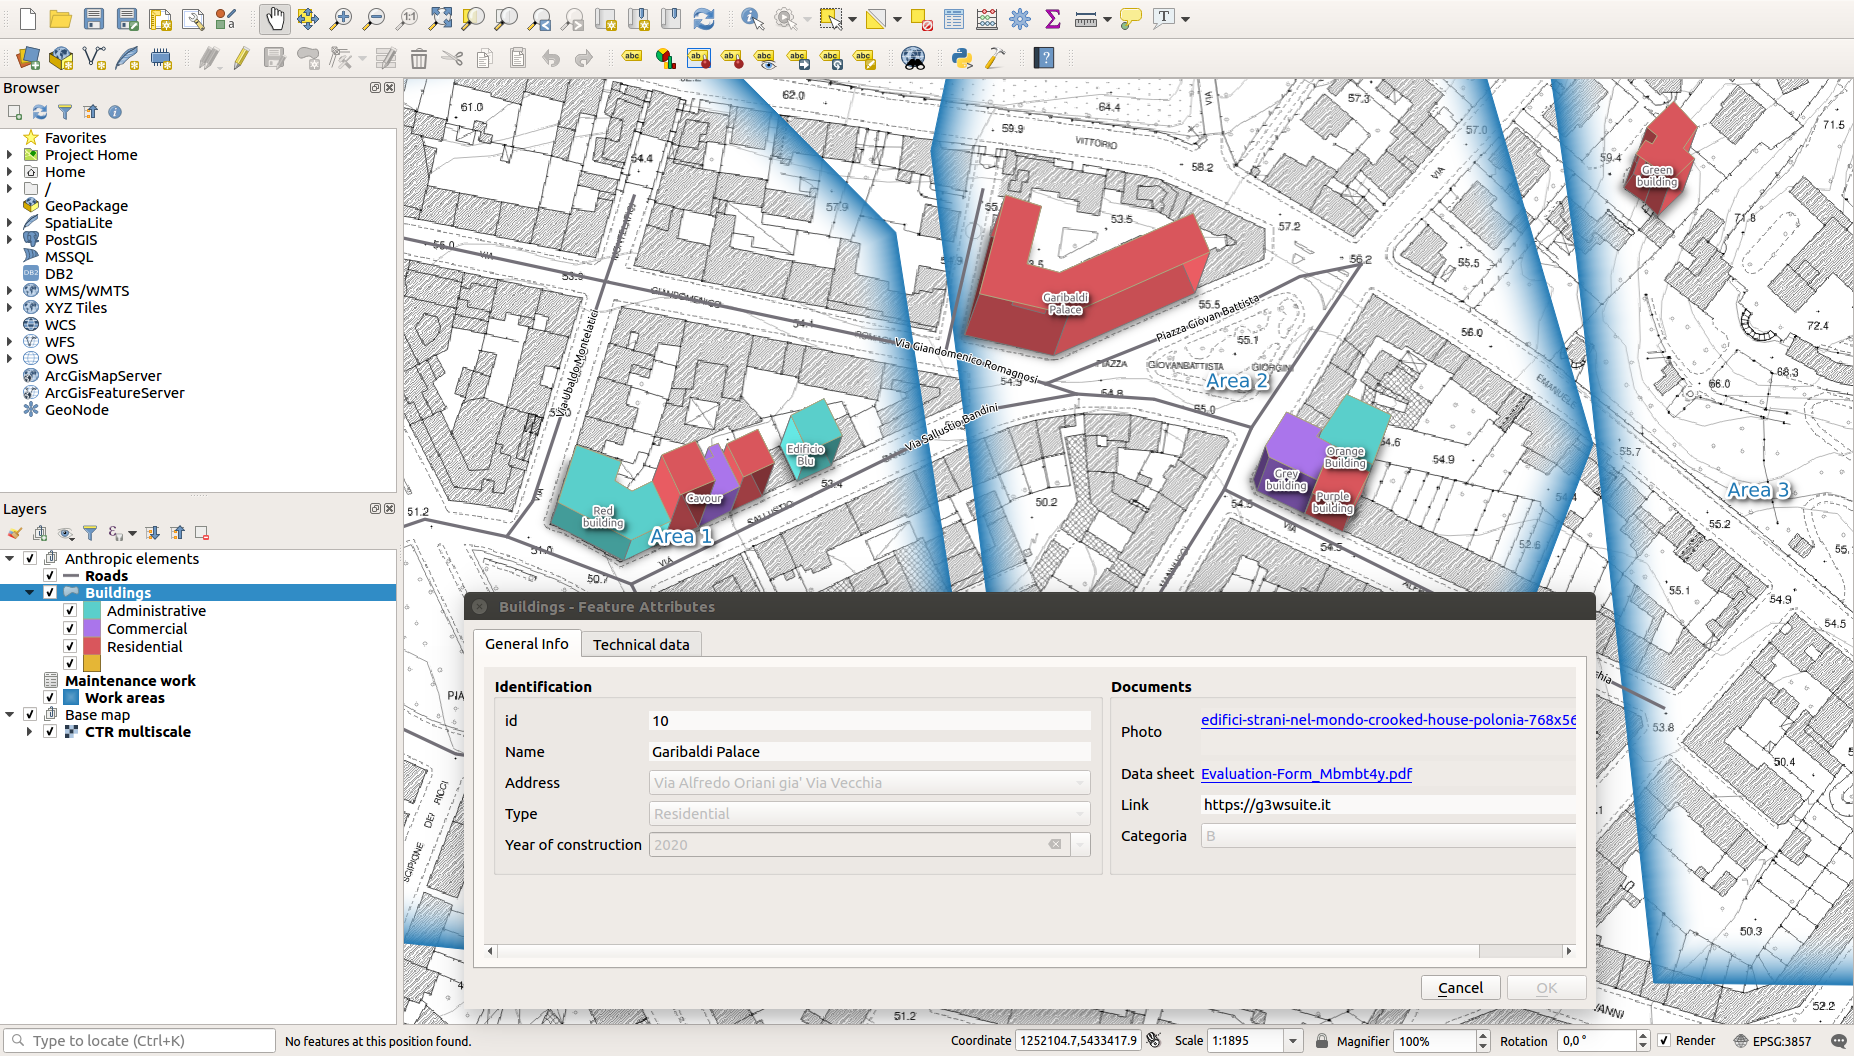 _images/demo_qgis_project.png